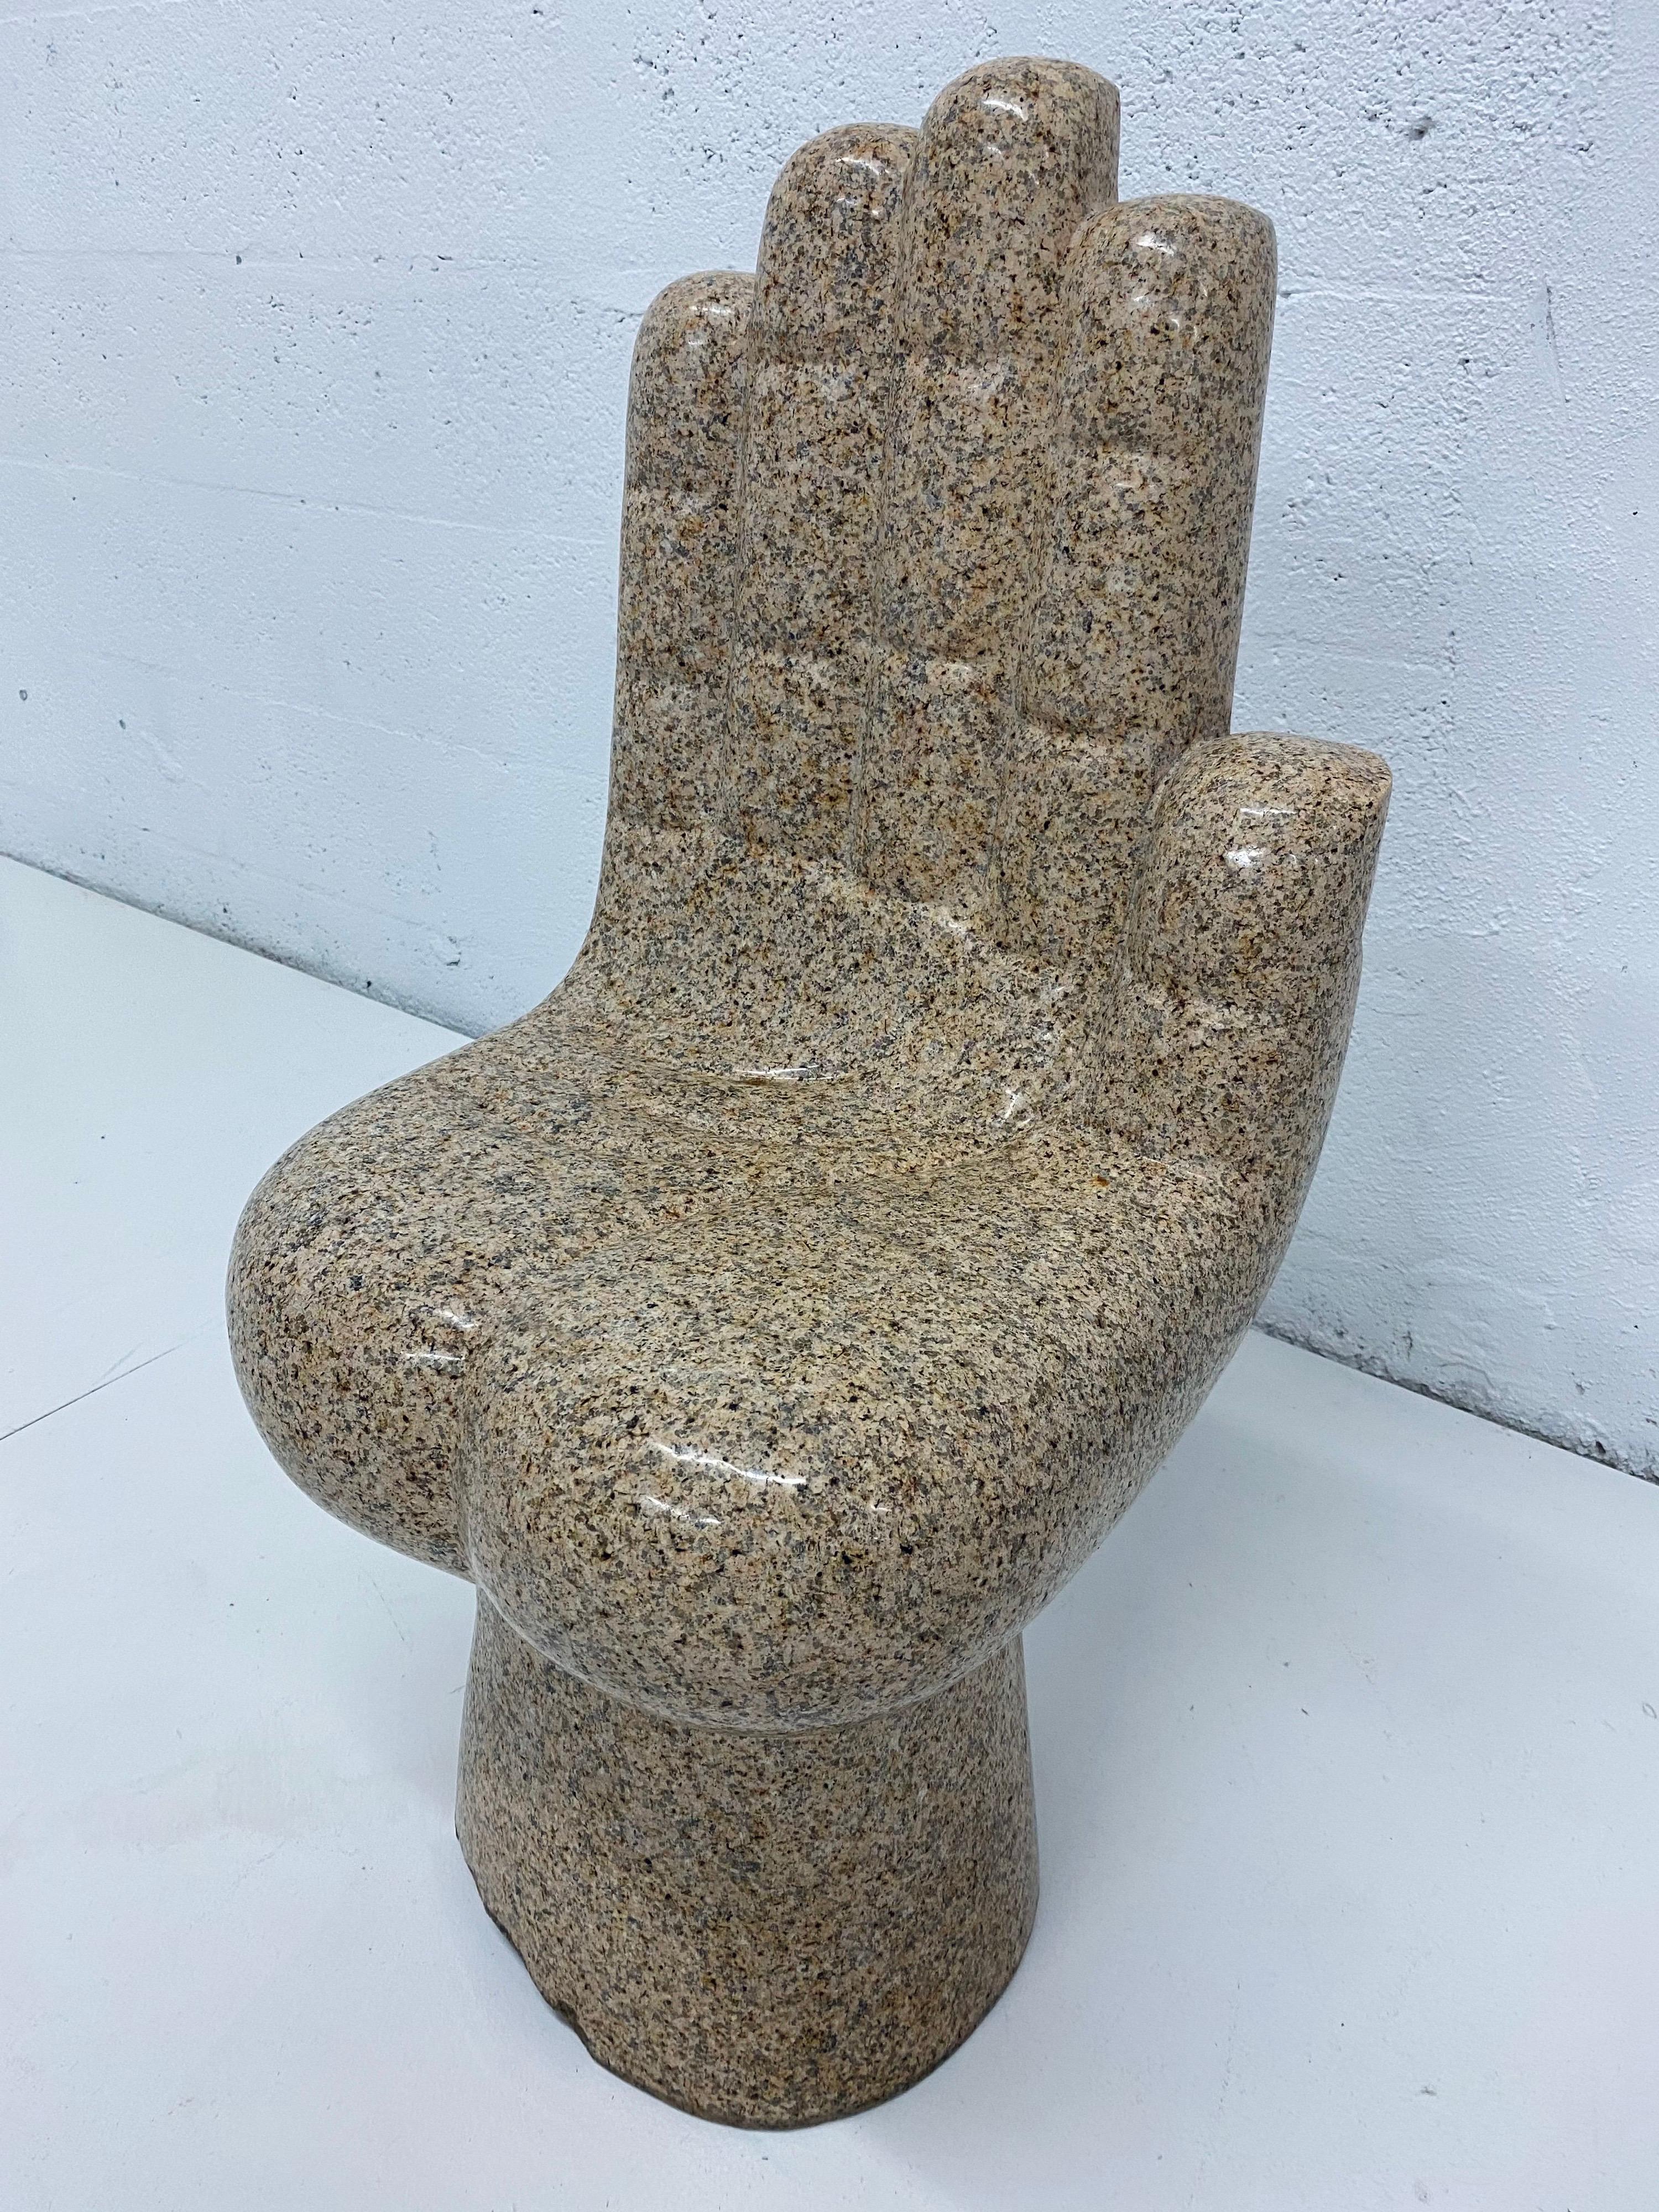 Mid-century outdoor / indoor chair made from a solid block of granite and hand carved to resemble a hand. Most likely inspired by the Pedro Friedeberg Hand Chair. Weighs 200lbs.